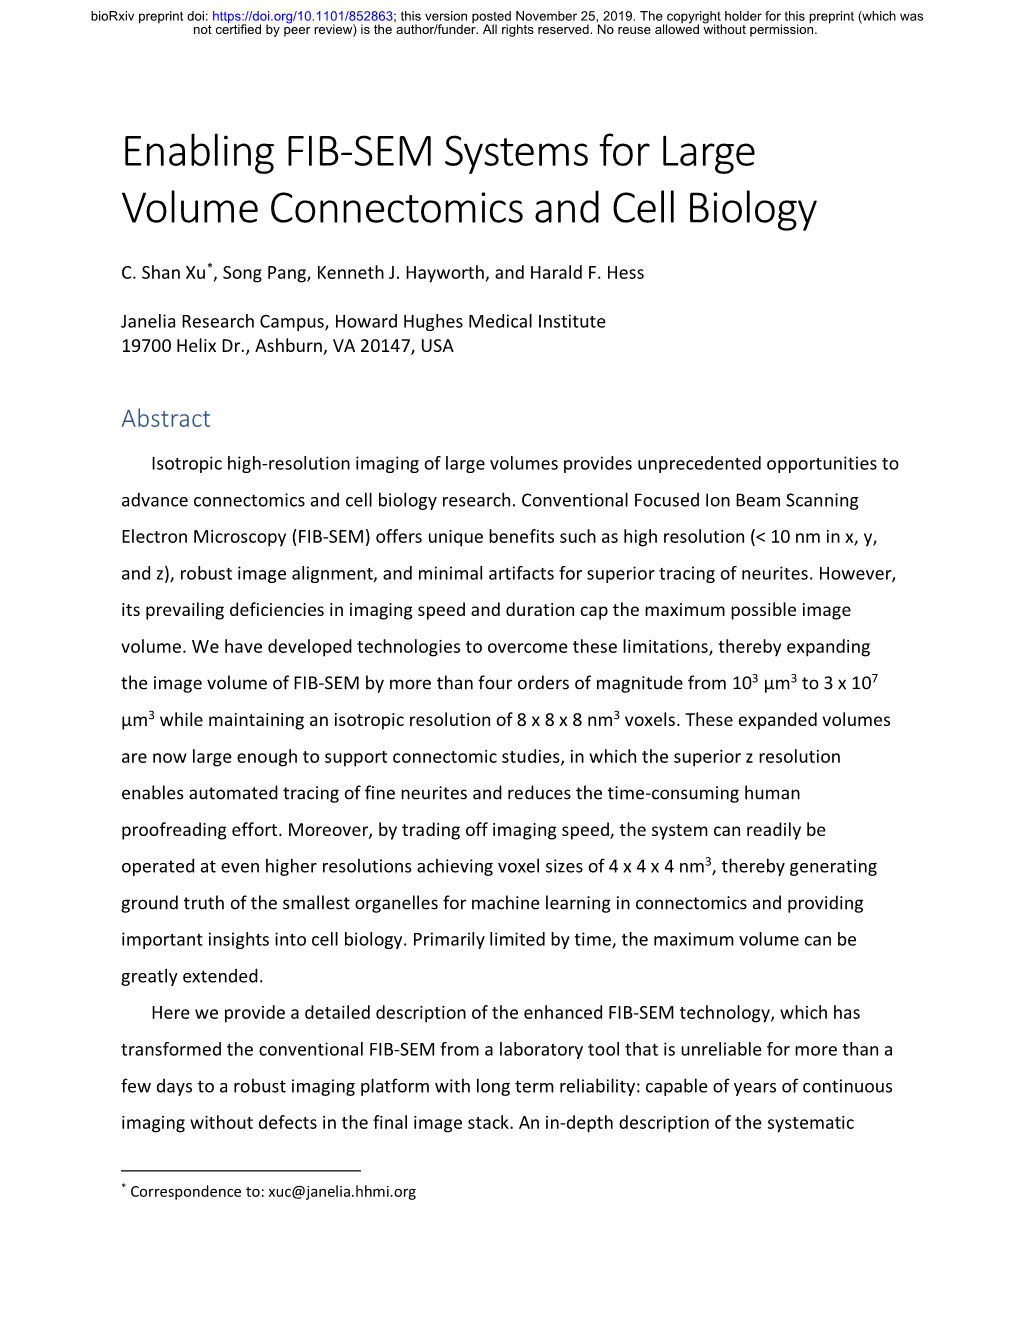 Enabling FIB-SEM Systems for Large Volume Connectomics and Cell Biology